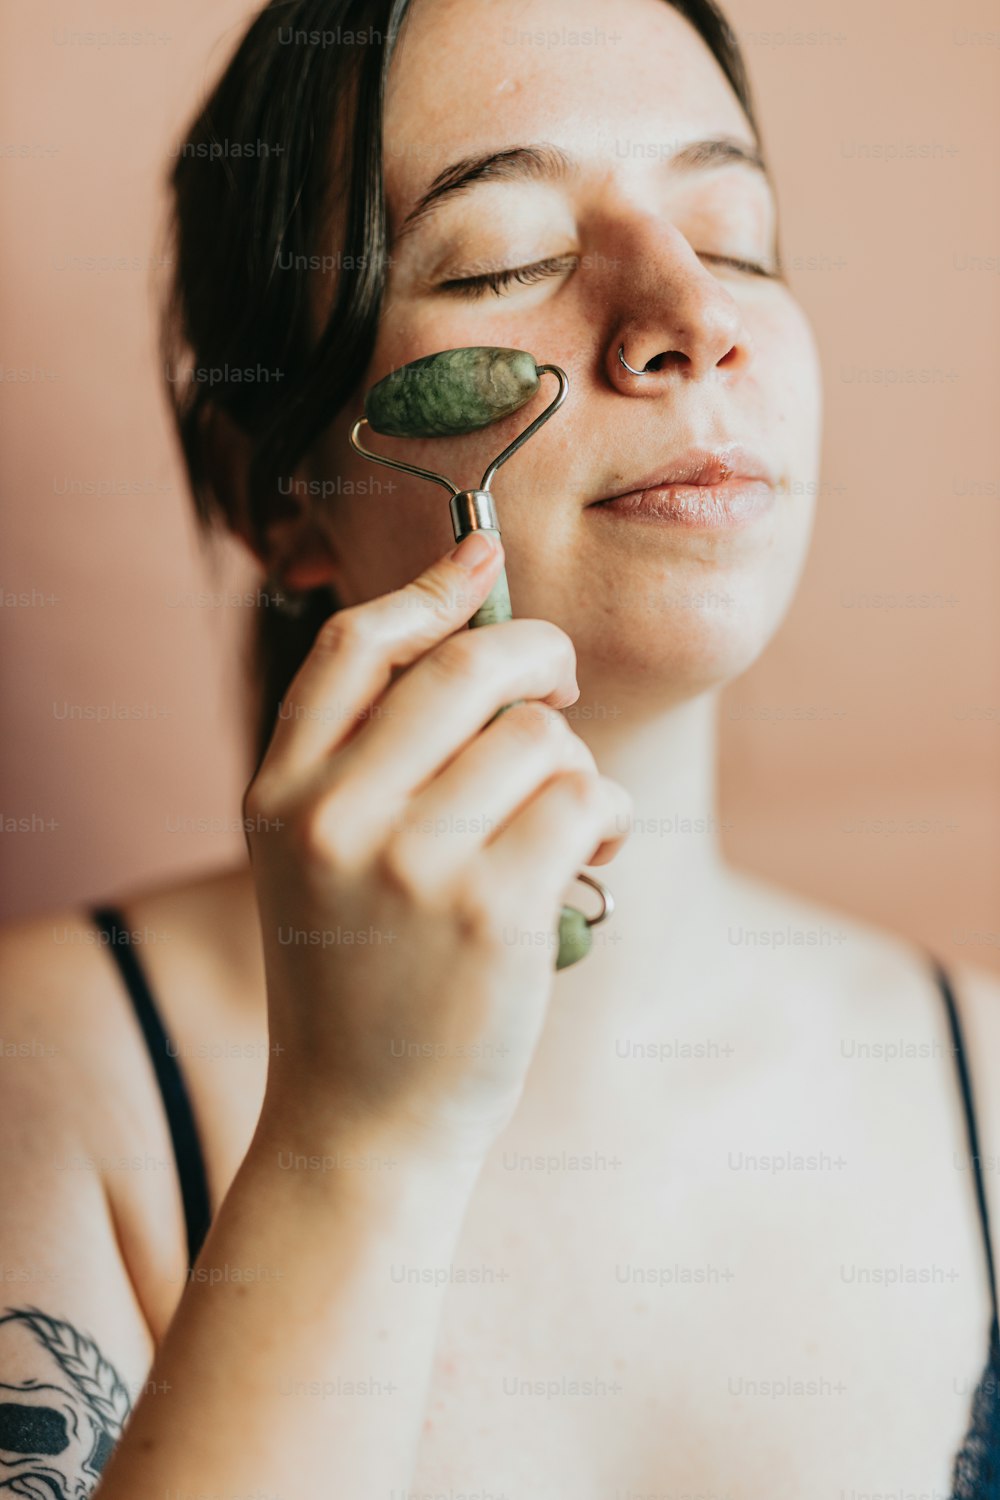 a woman holding a spoon with a leaf on it